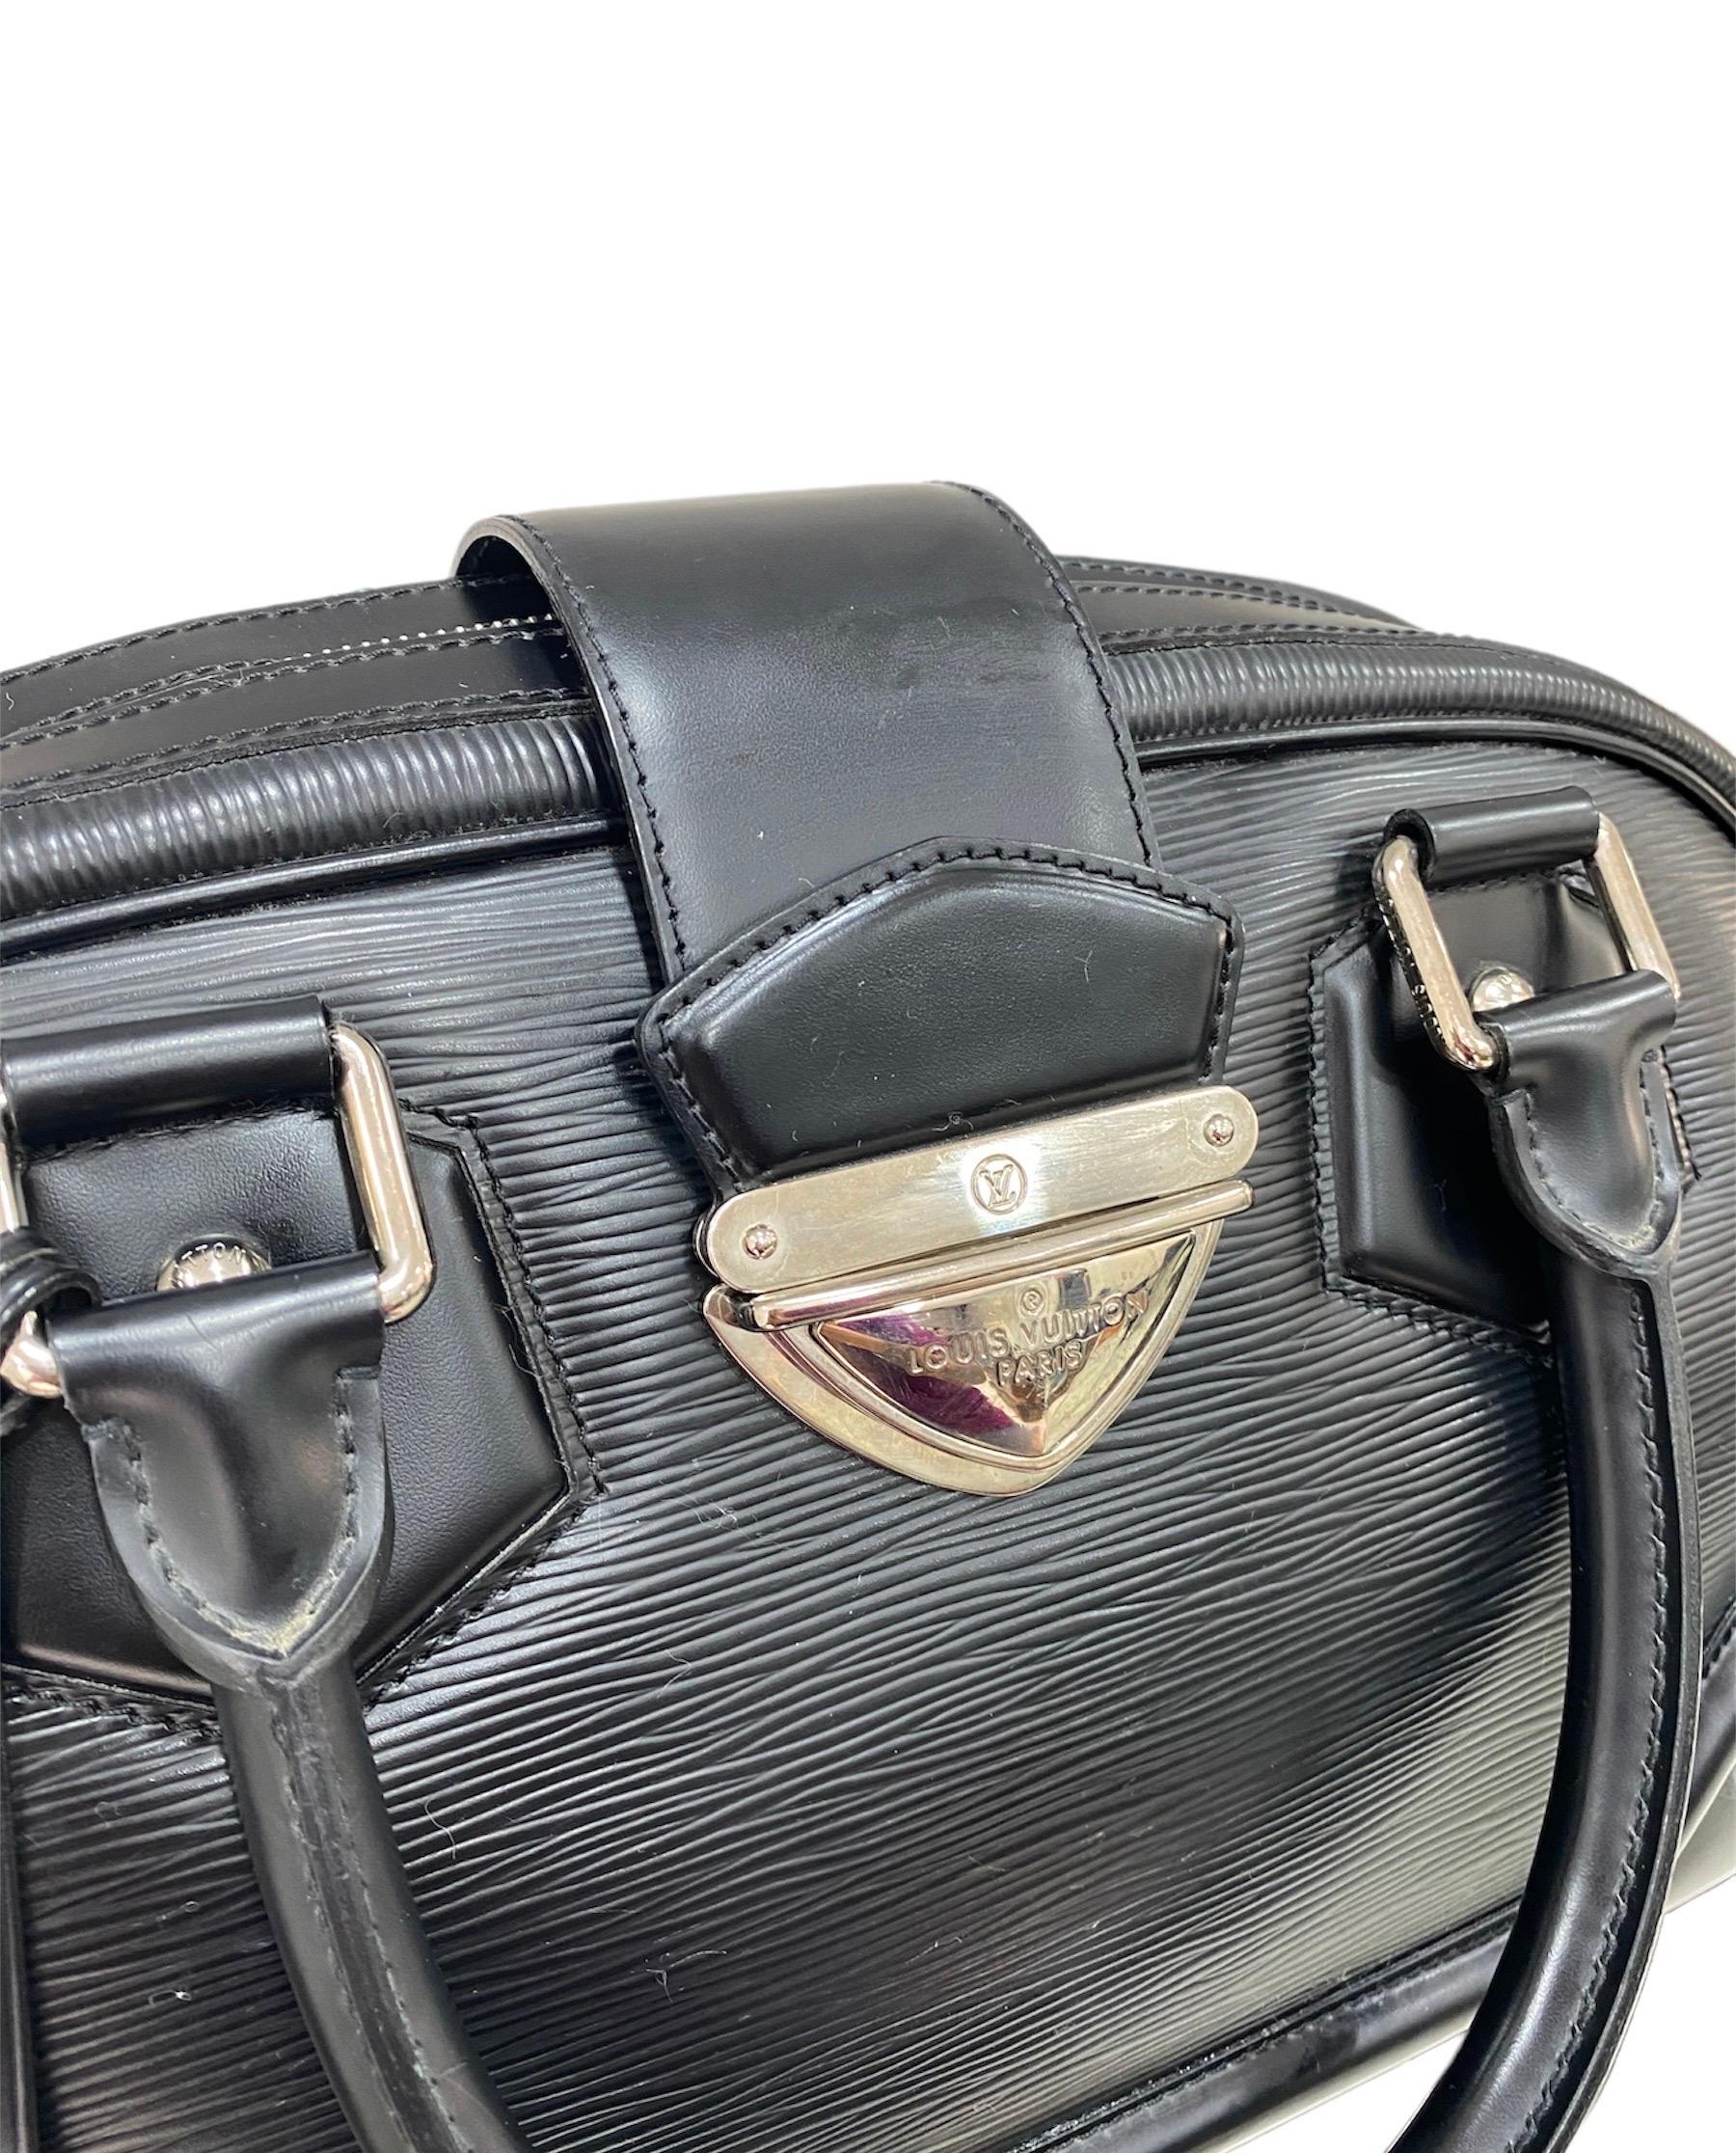 Louis Vuitton Bowling Montaigne model bag in black Epi MMcanvas.

Equipped with double leather handle with silver hardware.

Zip closure, internally large enough.

Despite being out of production and historical, the product is in excellent condition.